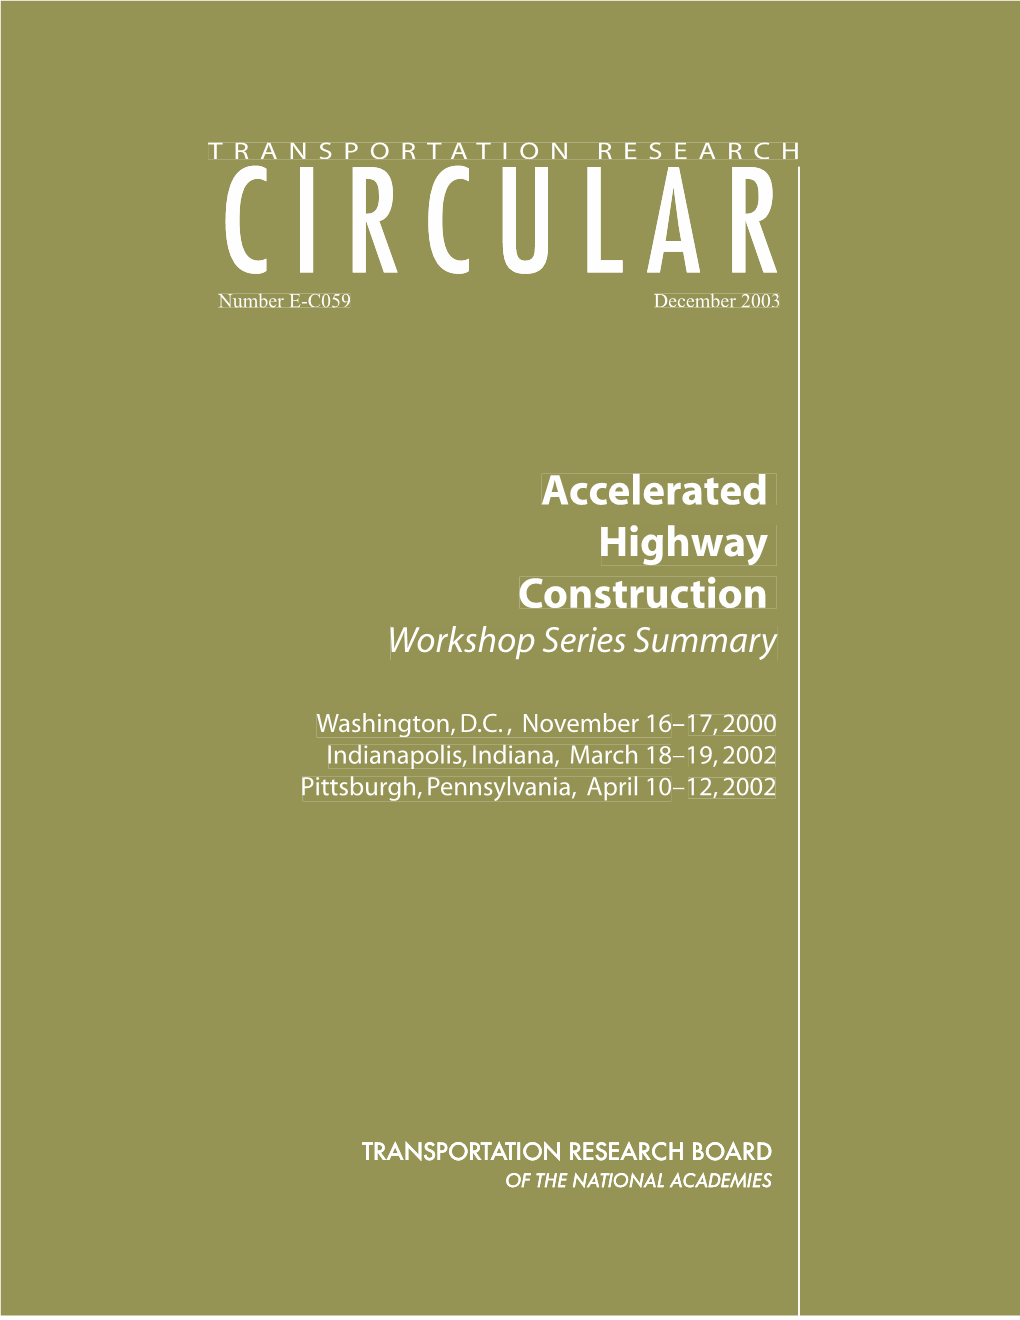 Accelerated Highway Construction Workshop Series Summary